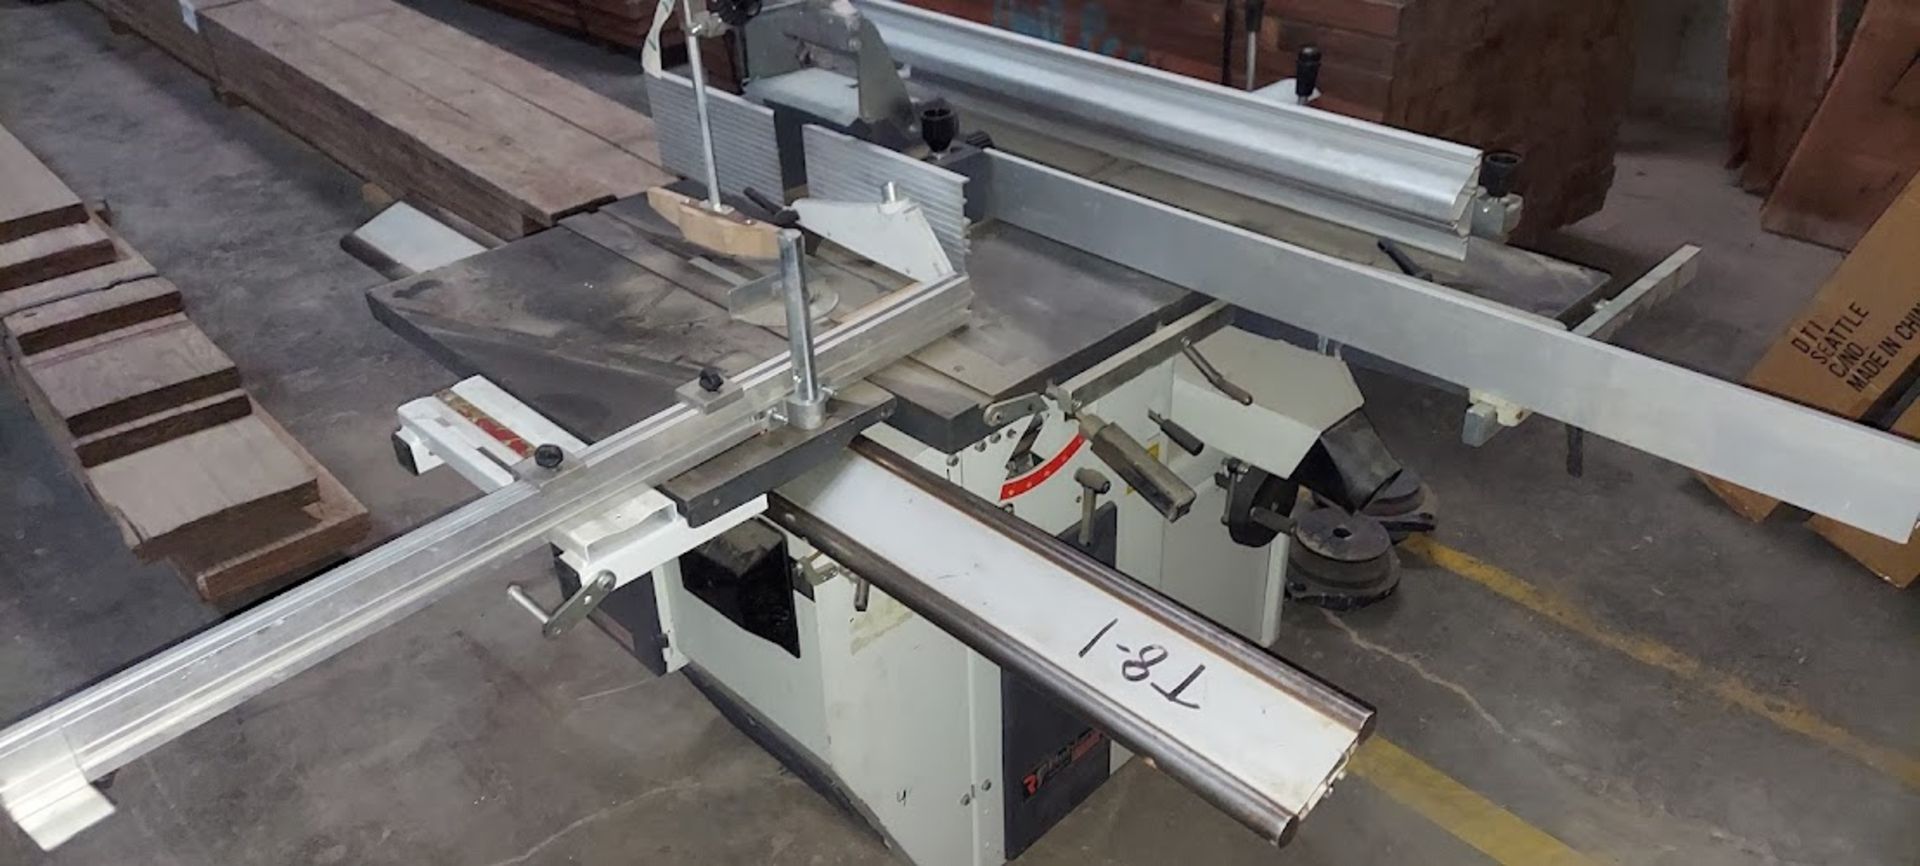 Laguna Robland Model # X31 Combination Machine, 10" Sliding Table Saw, 12" Jointer & Planer, - Image 2 of 14